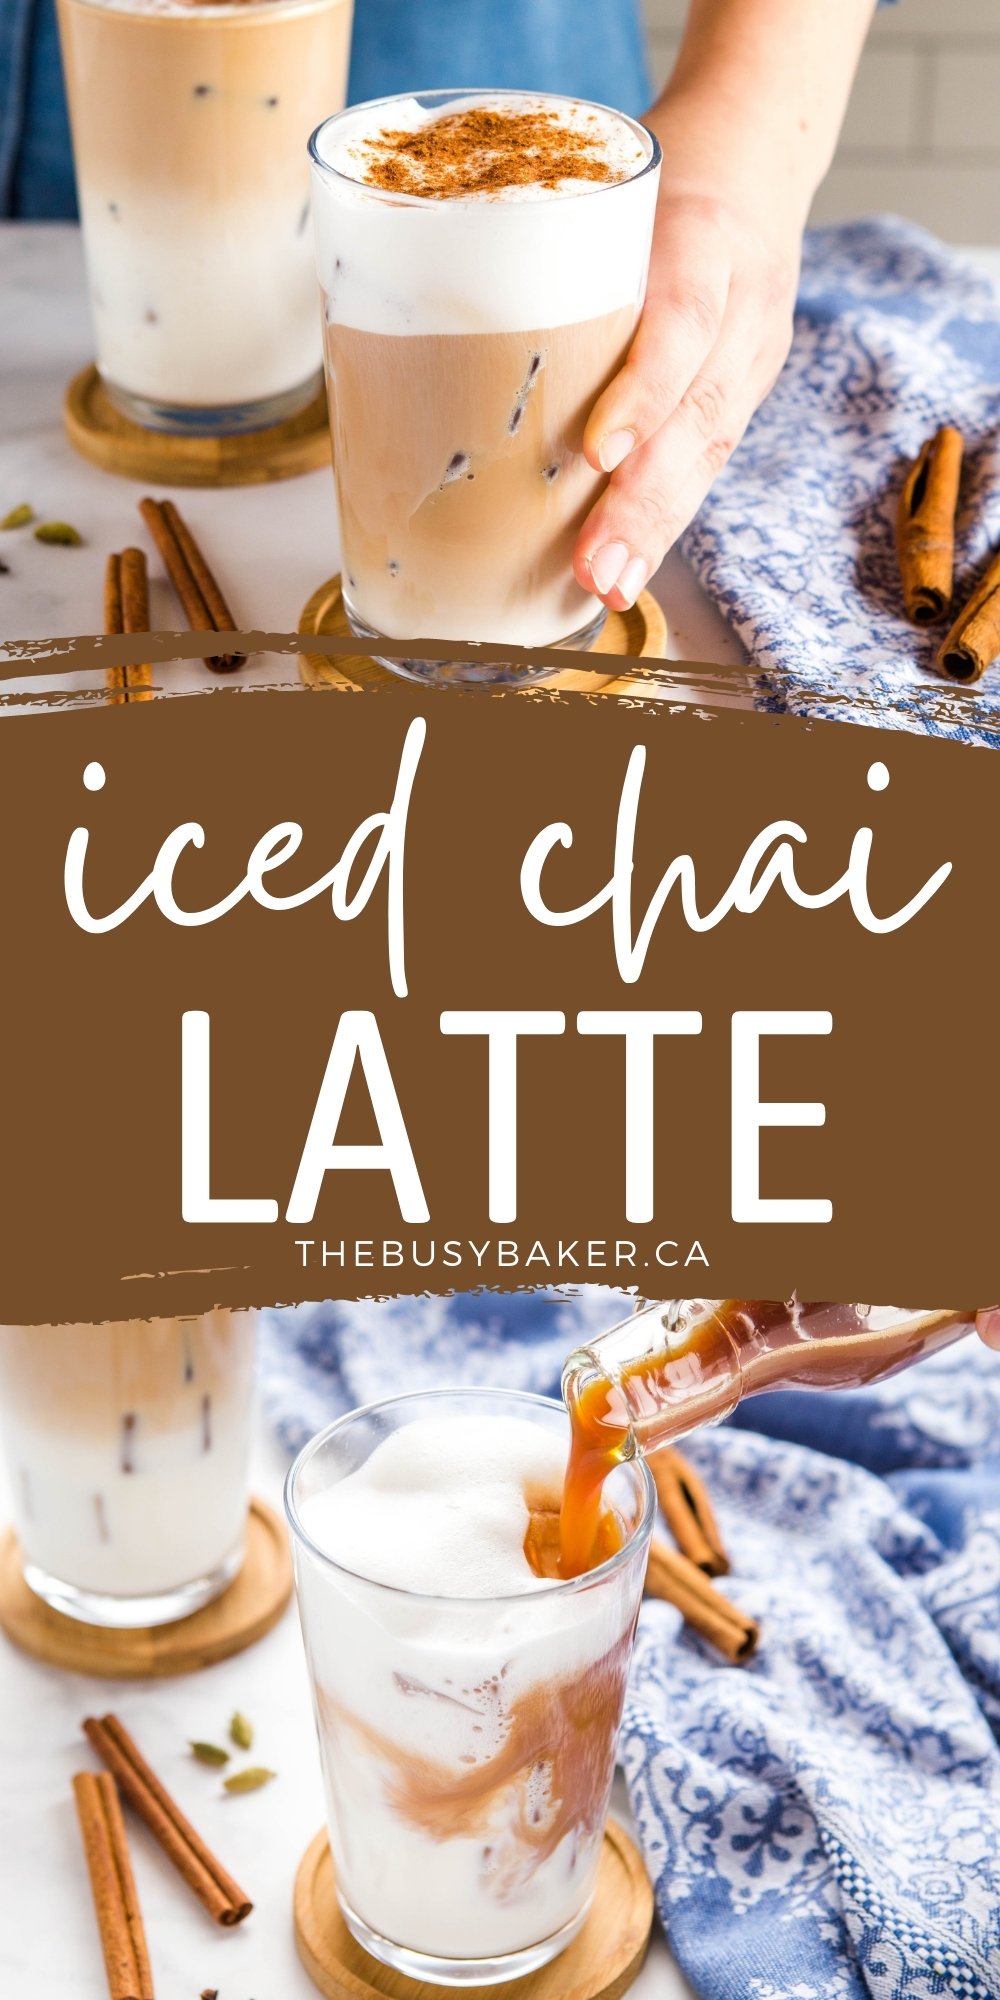 This Iced Chai Latte is the perfect refreshing tea latte. Simple chai tea, foamed milk & simple syrup - easy to make & delicious! Sugar-free and dairy-free option! Recipe from thebusybaker.ca! #icedchailatte #chailatte #tealatte #icedlatte #coffeeshop #starbucks #copycatrecipe #homemade via @busybakerblog